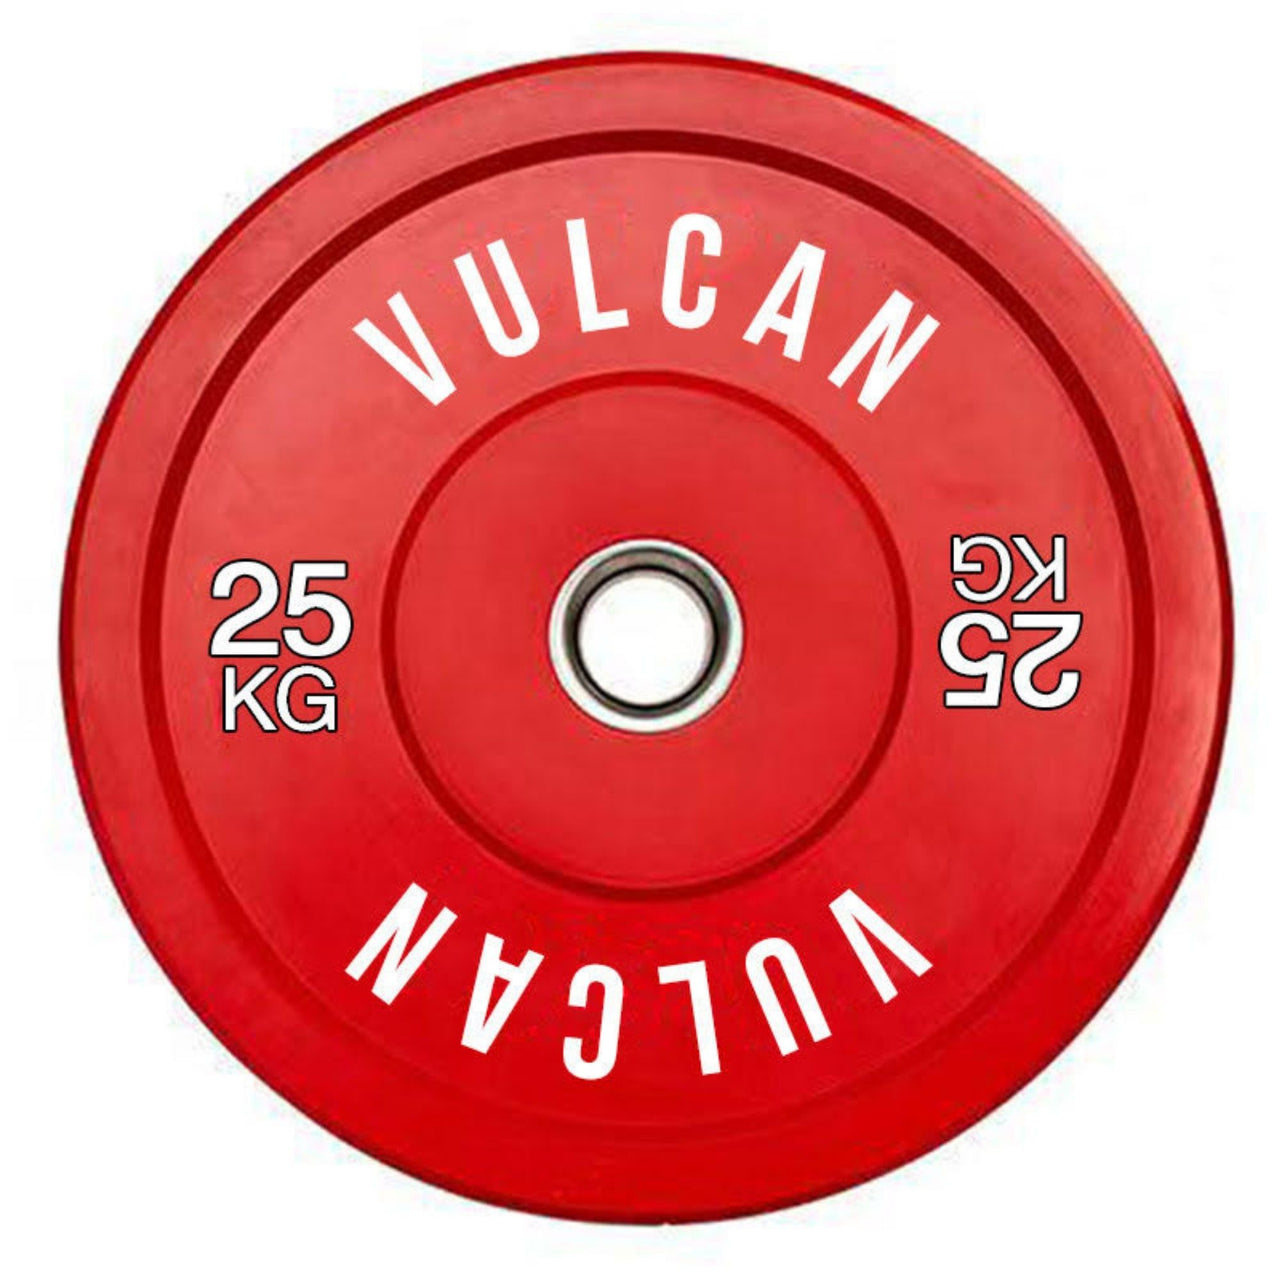 VULCAN Olympic Colour Bumper Plates | IN STOCK